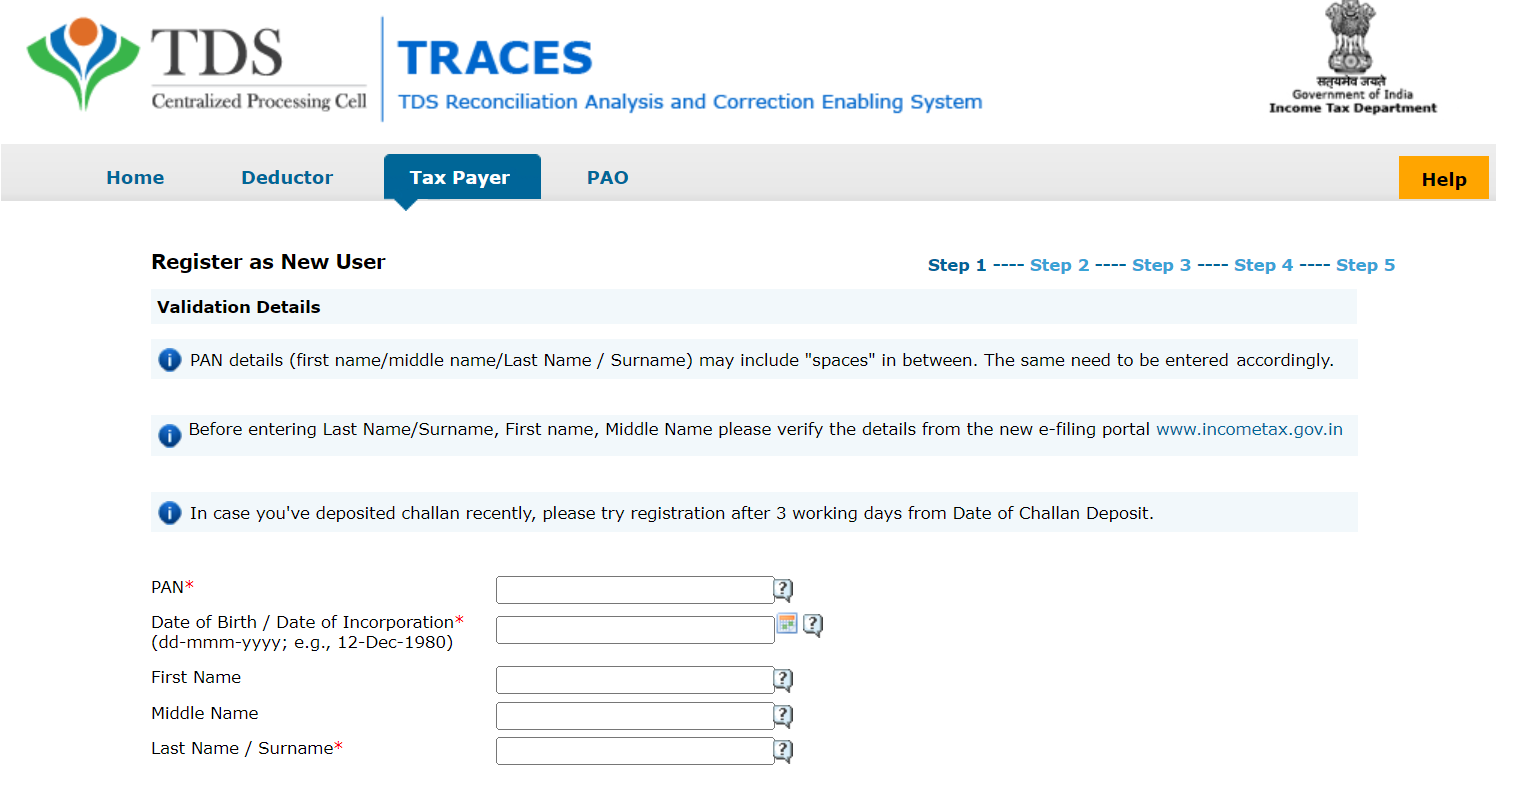 Register for TRACES